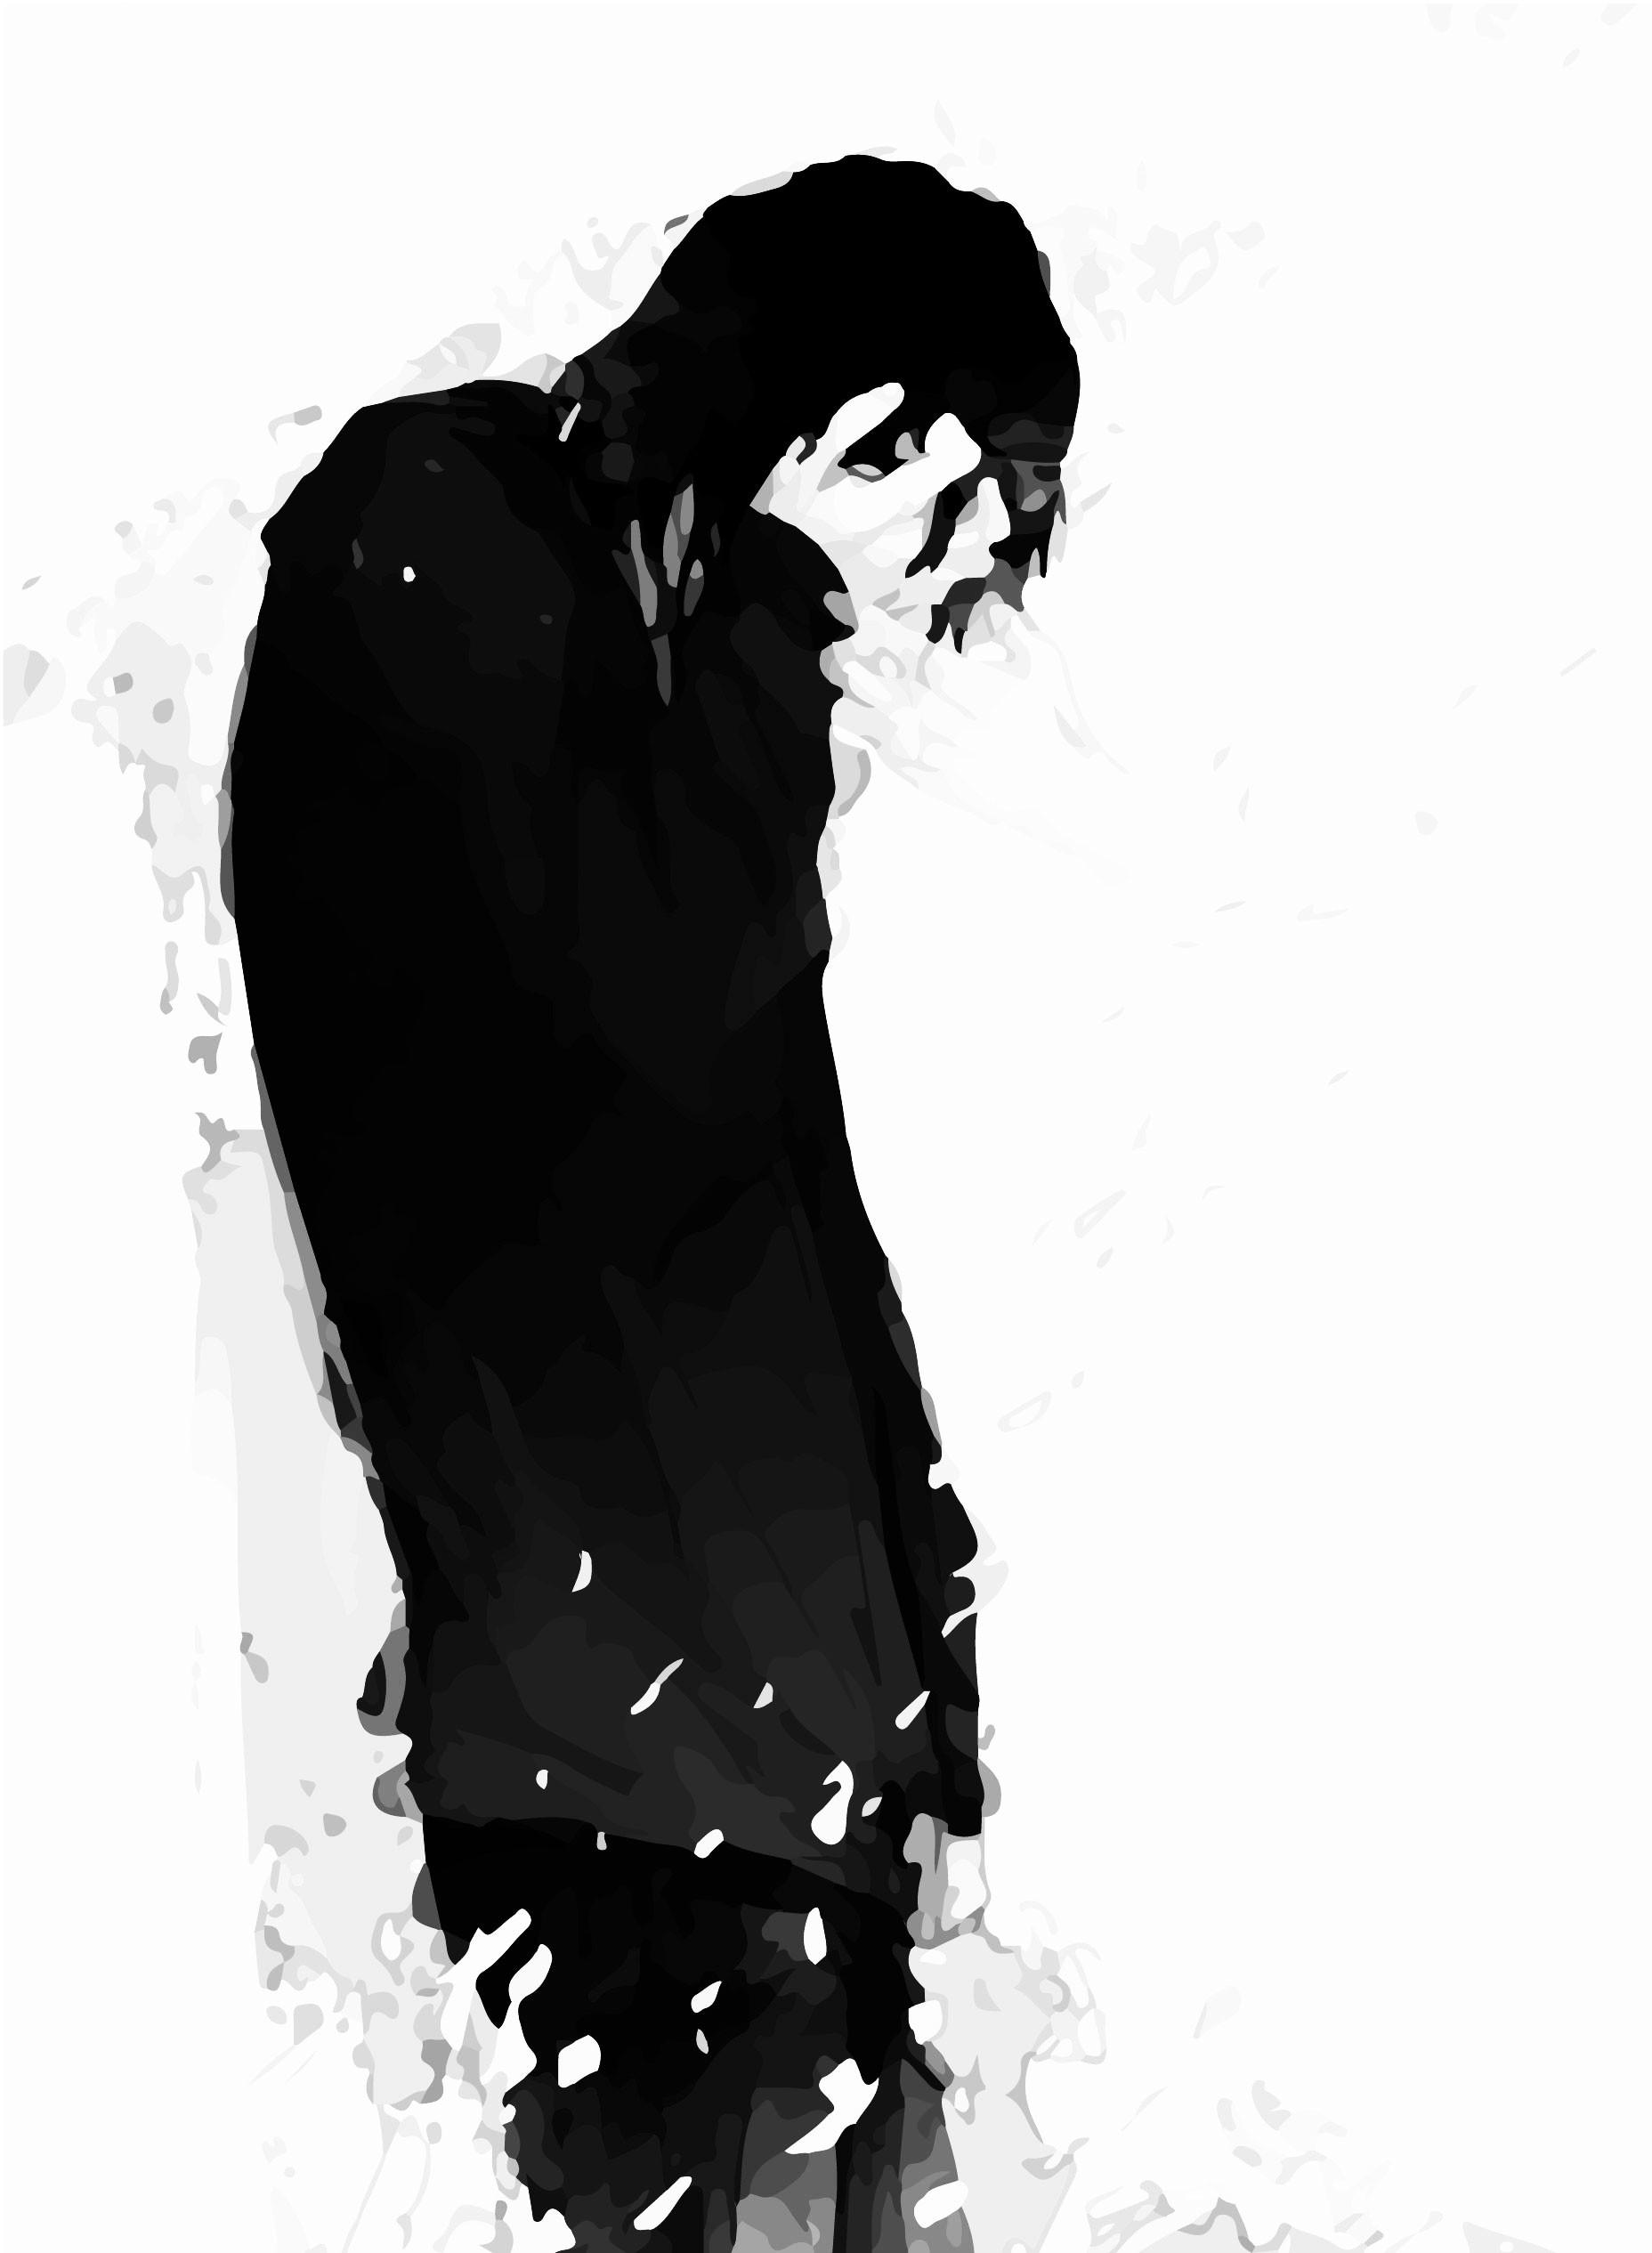 Anime Depressed Guy Wallpapers - Wallpaper Cave